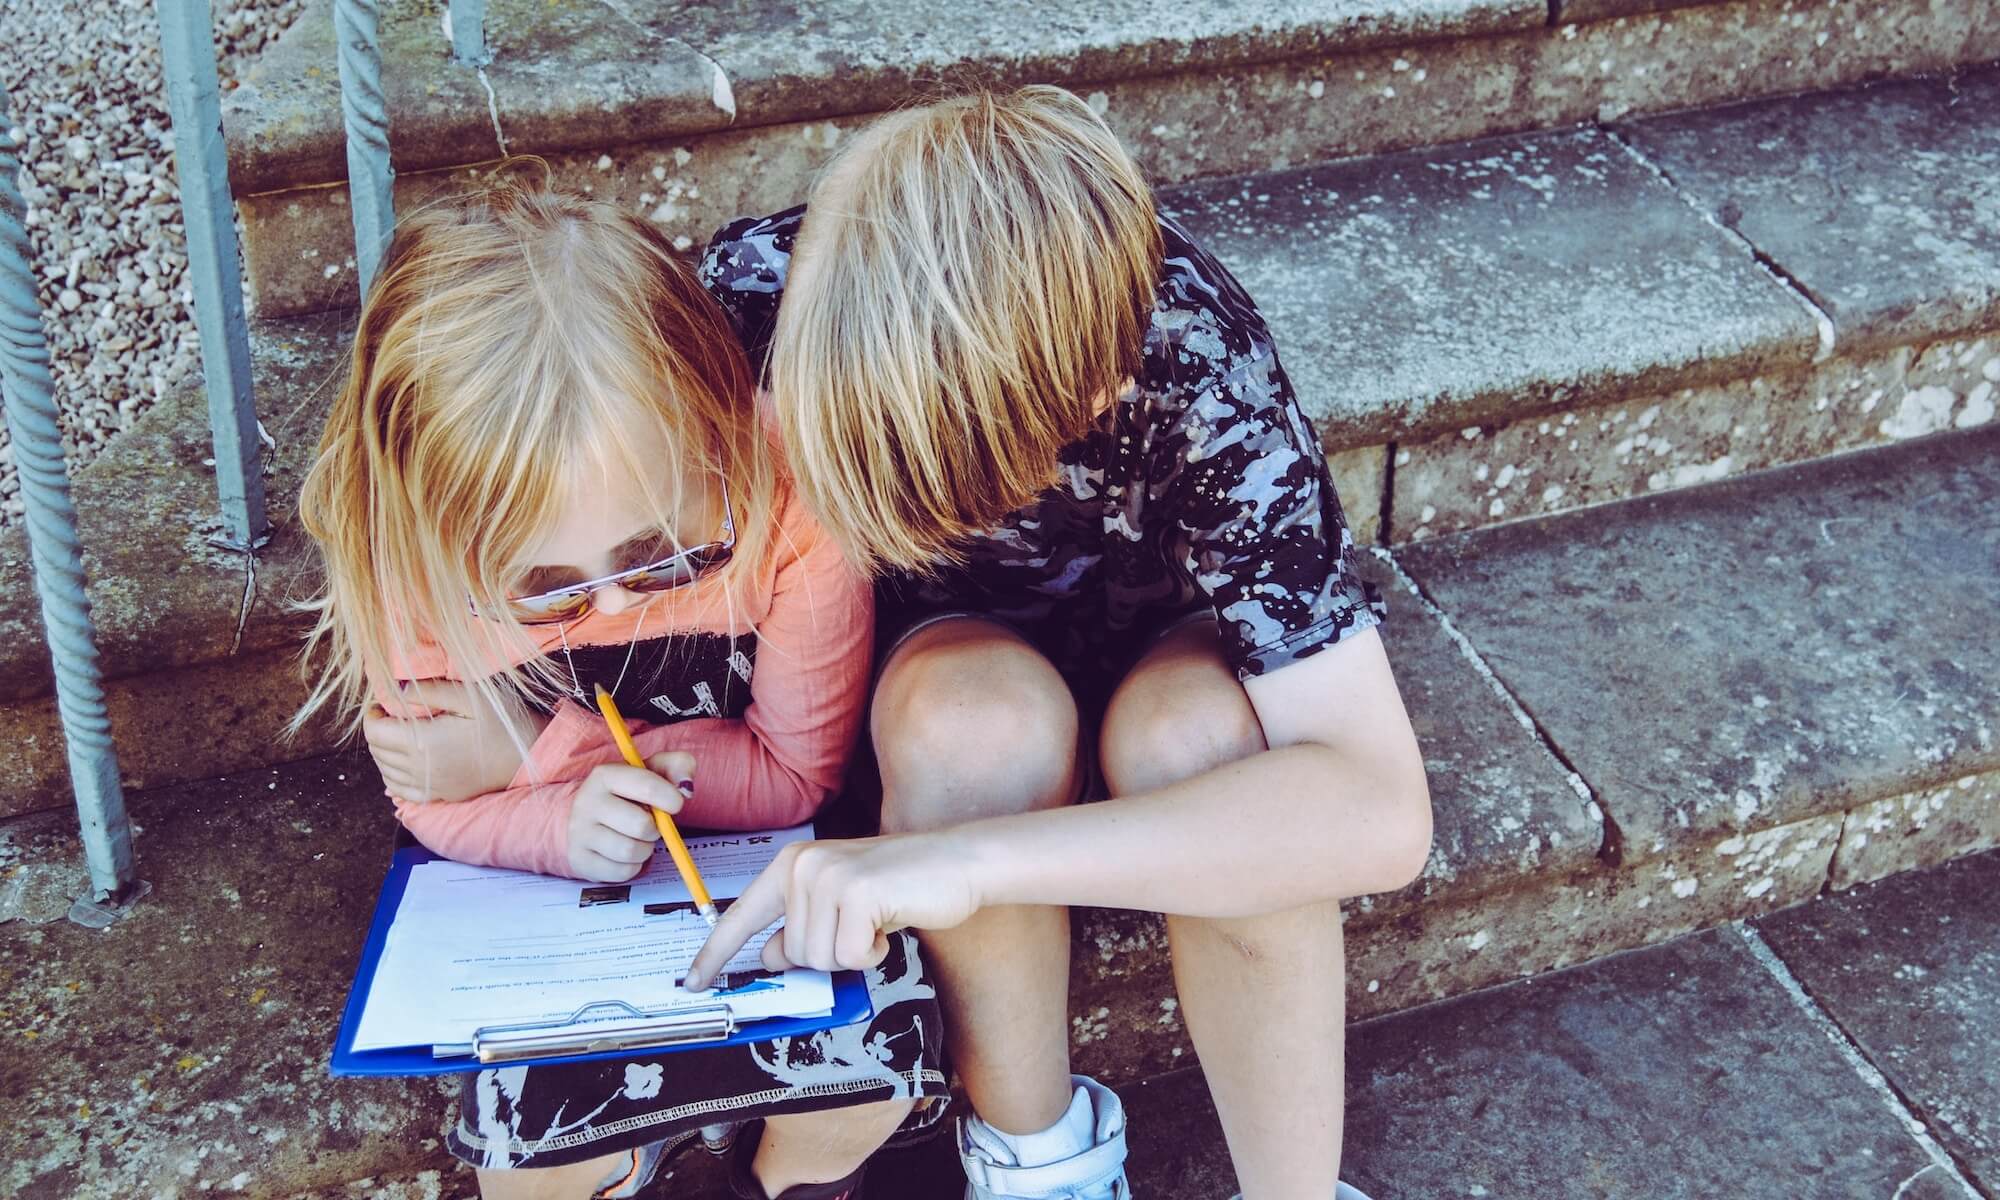 Two children sitting on steps working together on a document on a clipboard